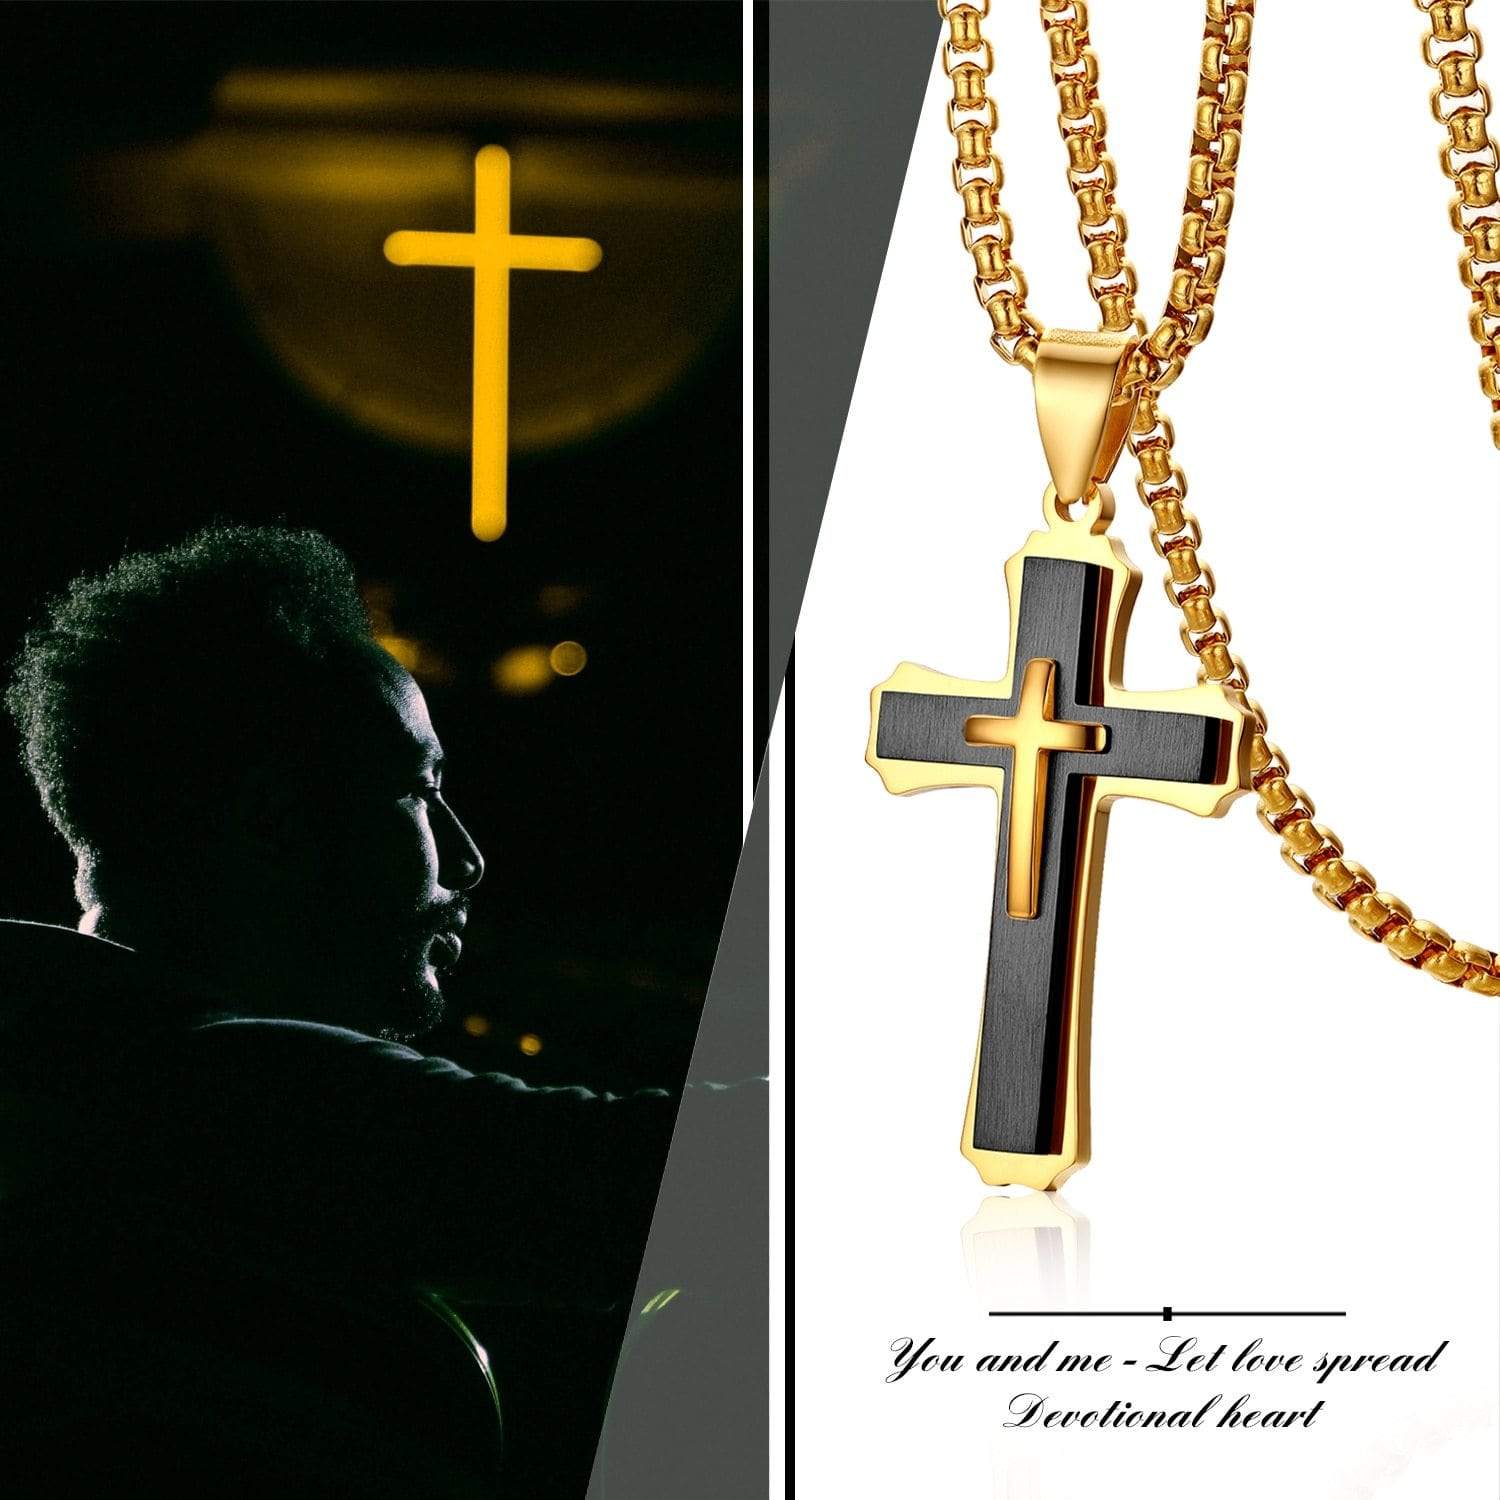 Boniskiss Stainless Steel Easter Cross Necklace - Used by God Clothing